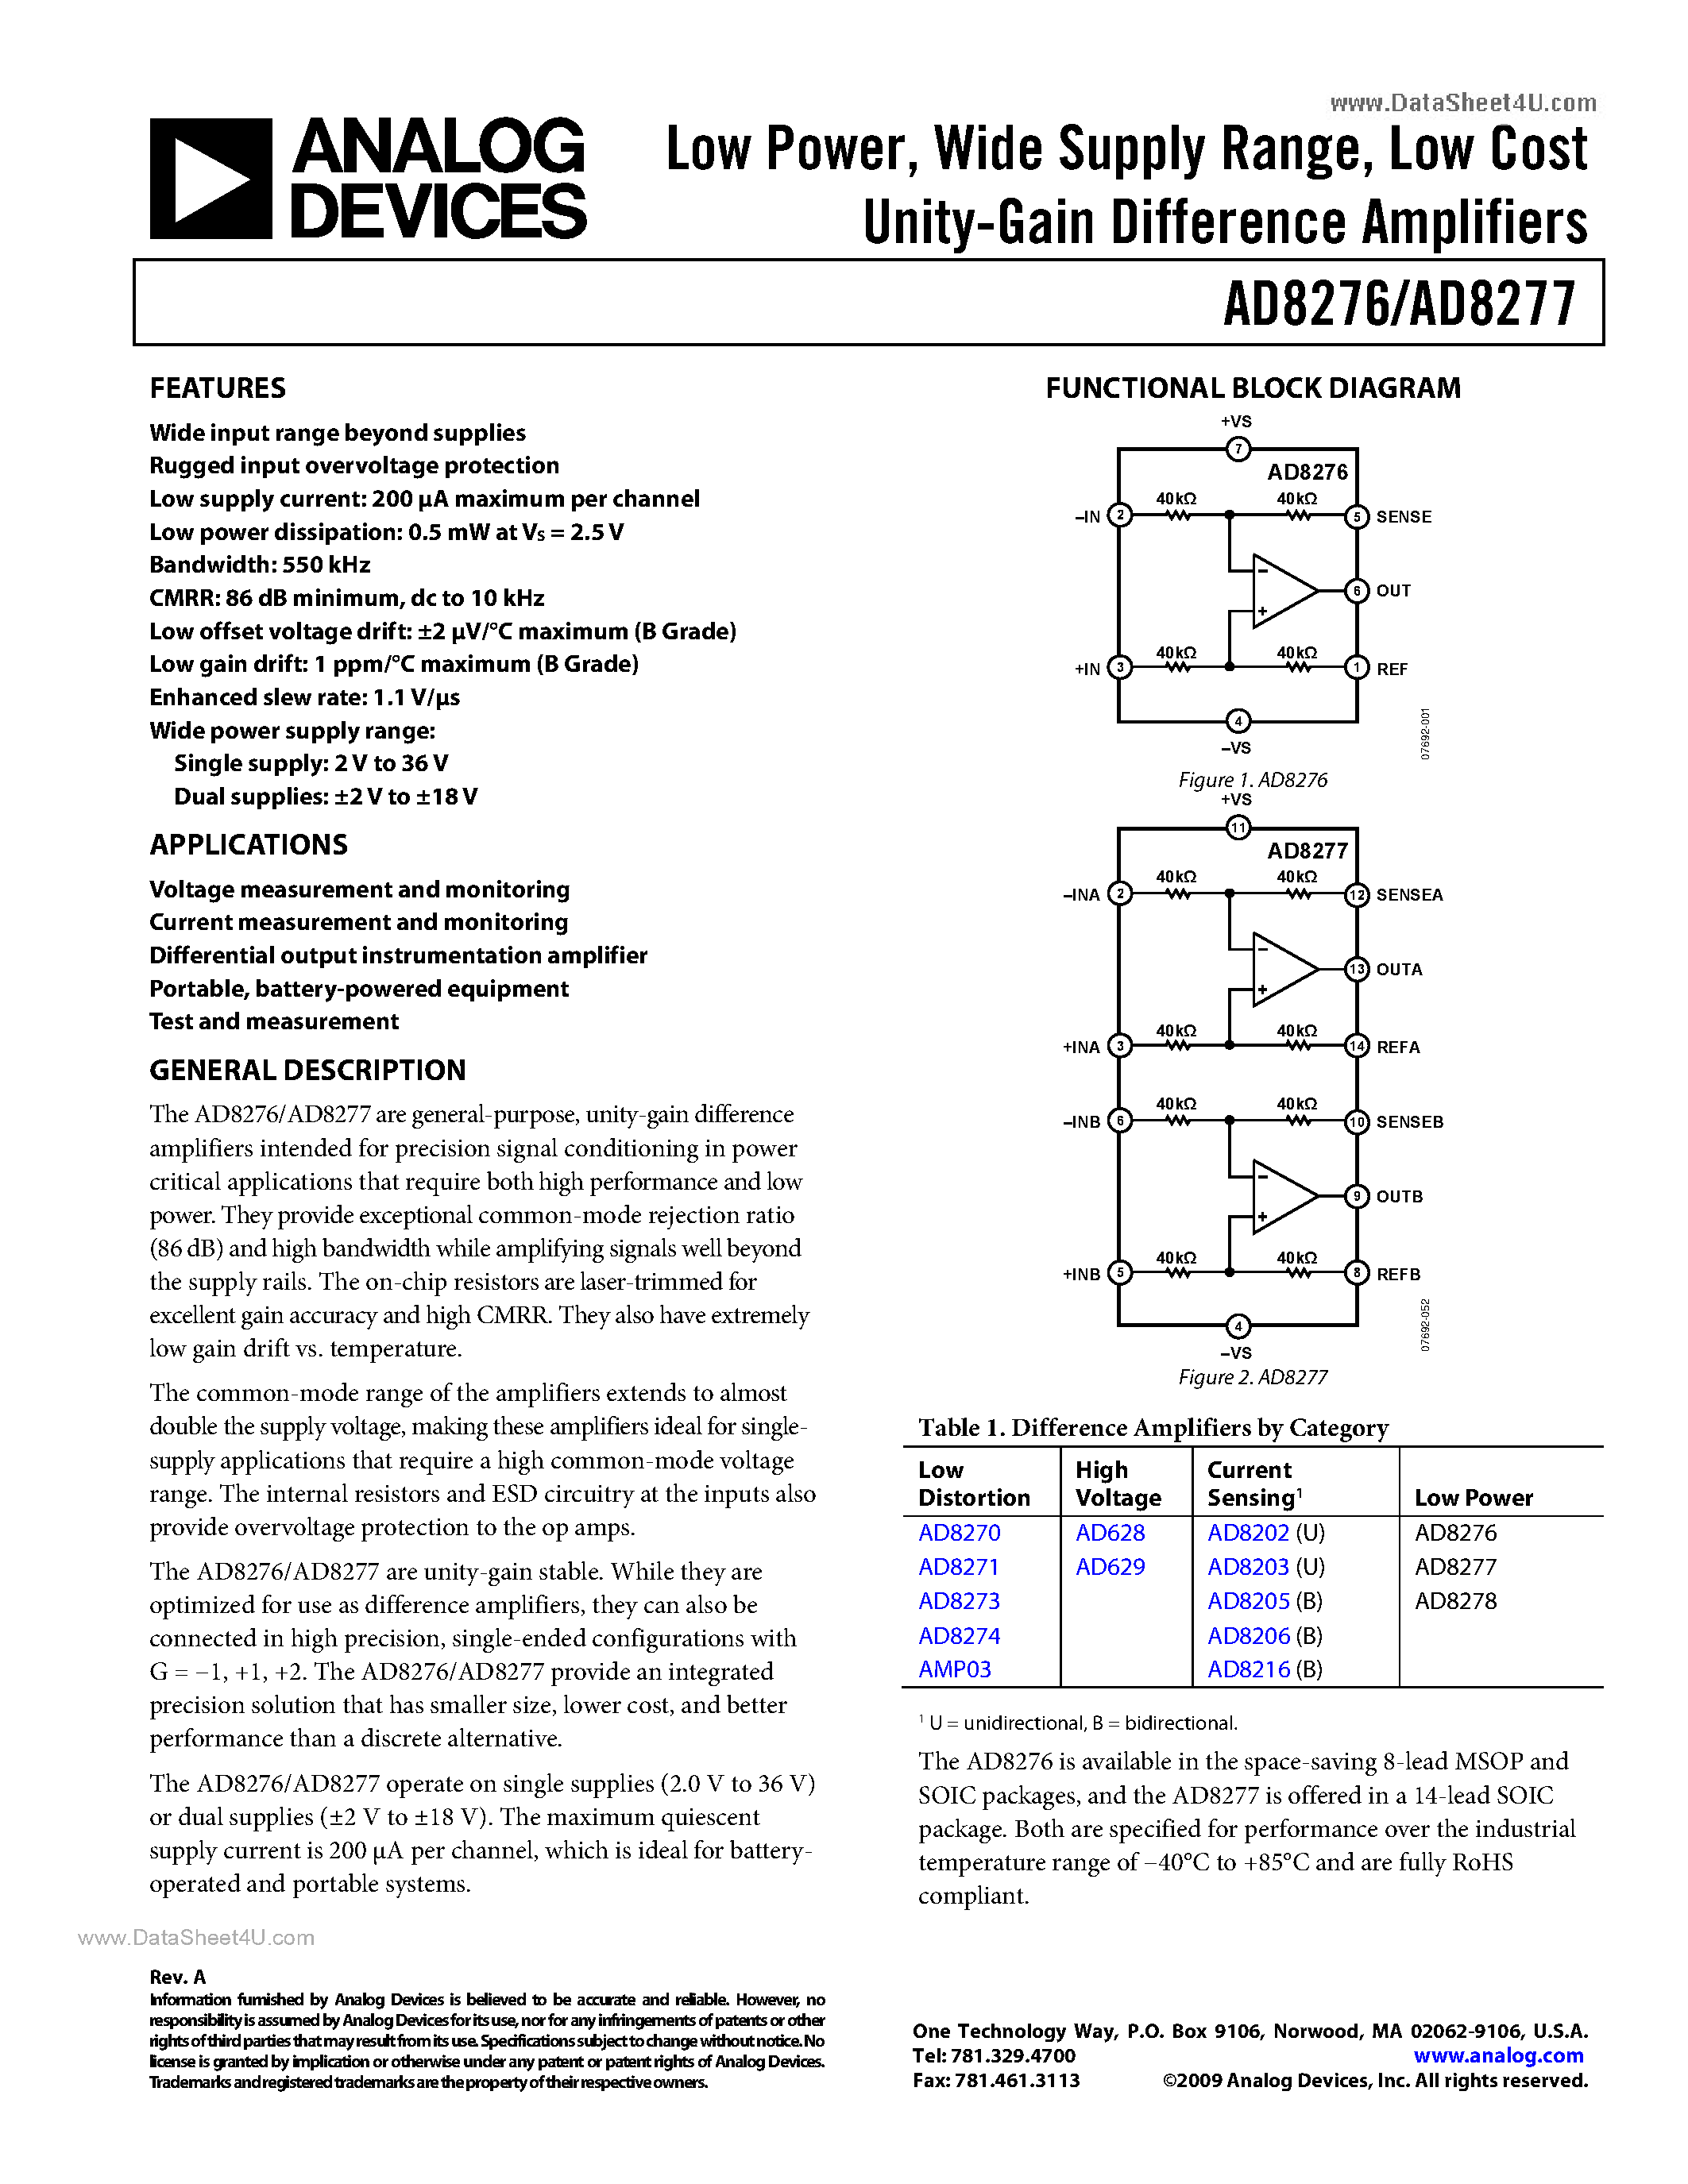 Datasheet AD8276 - (AD8276 / AD8277) Low Cost Unity-Gain Difference Amplifiers page 1